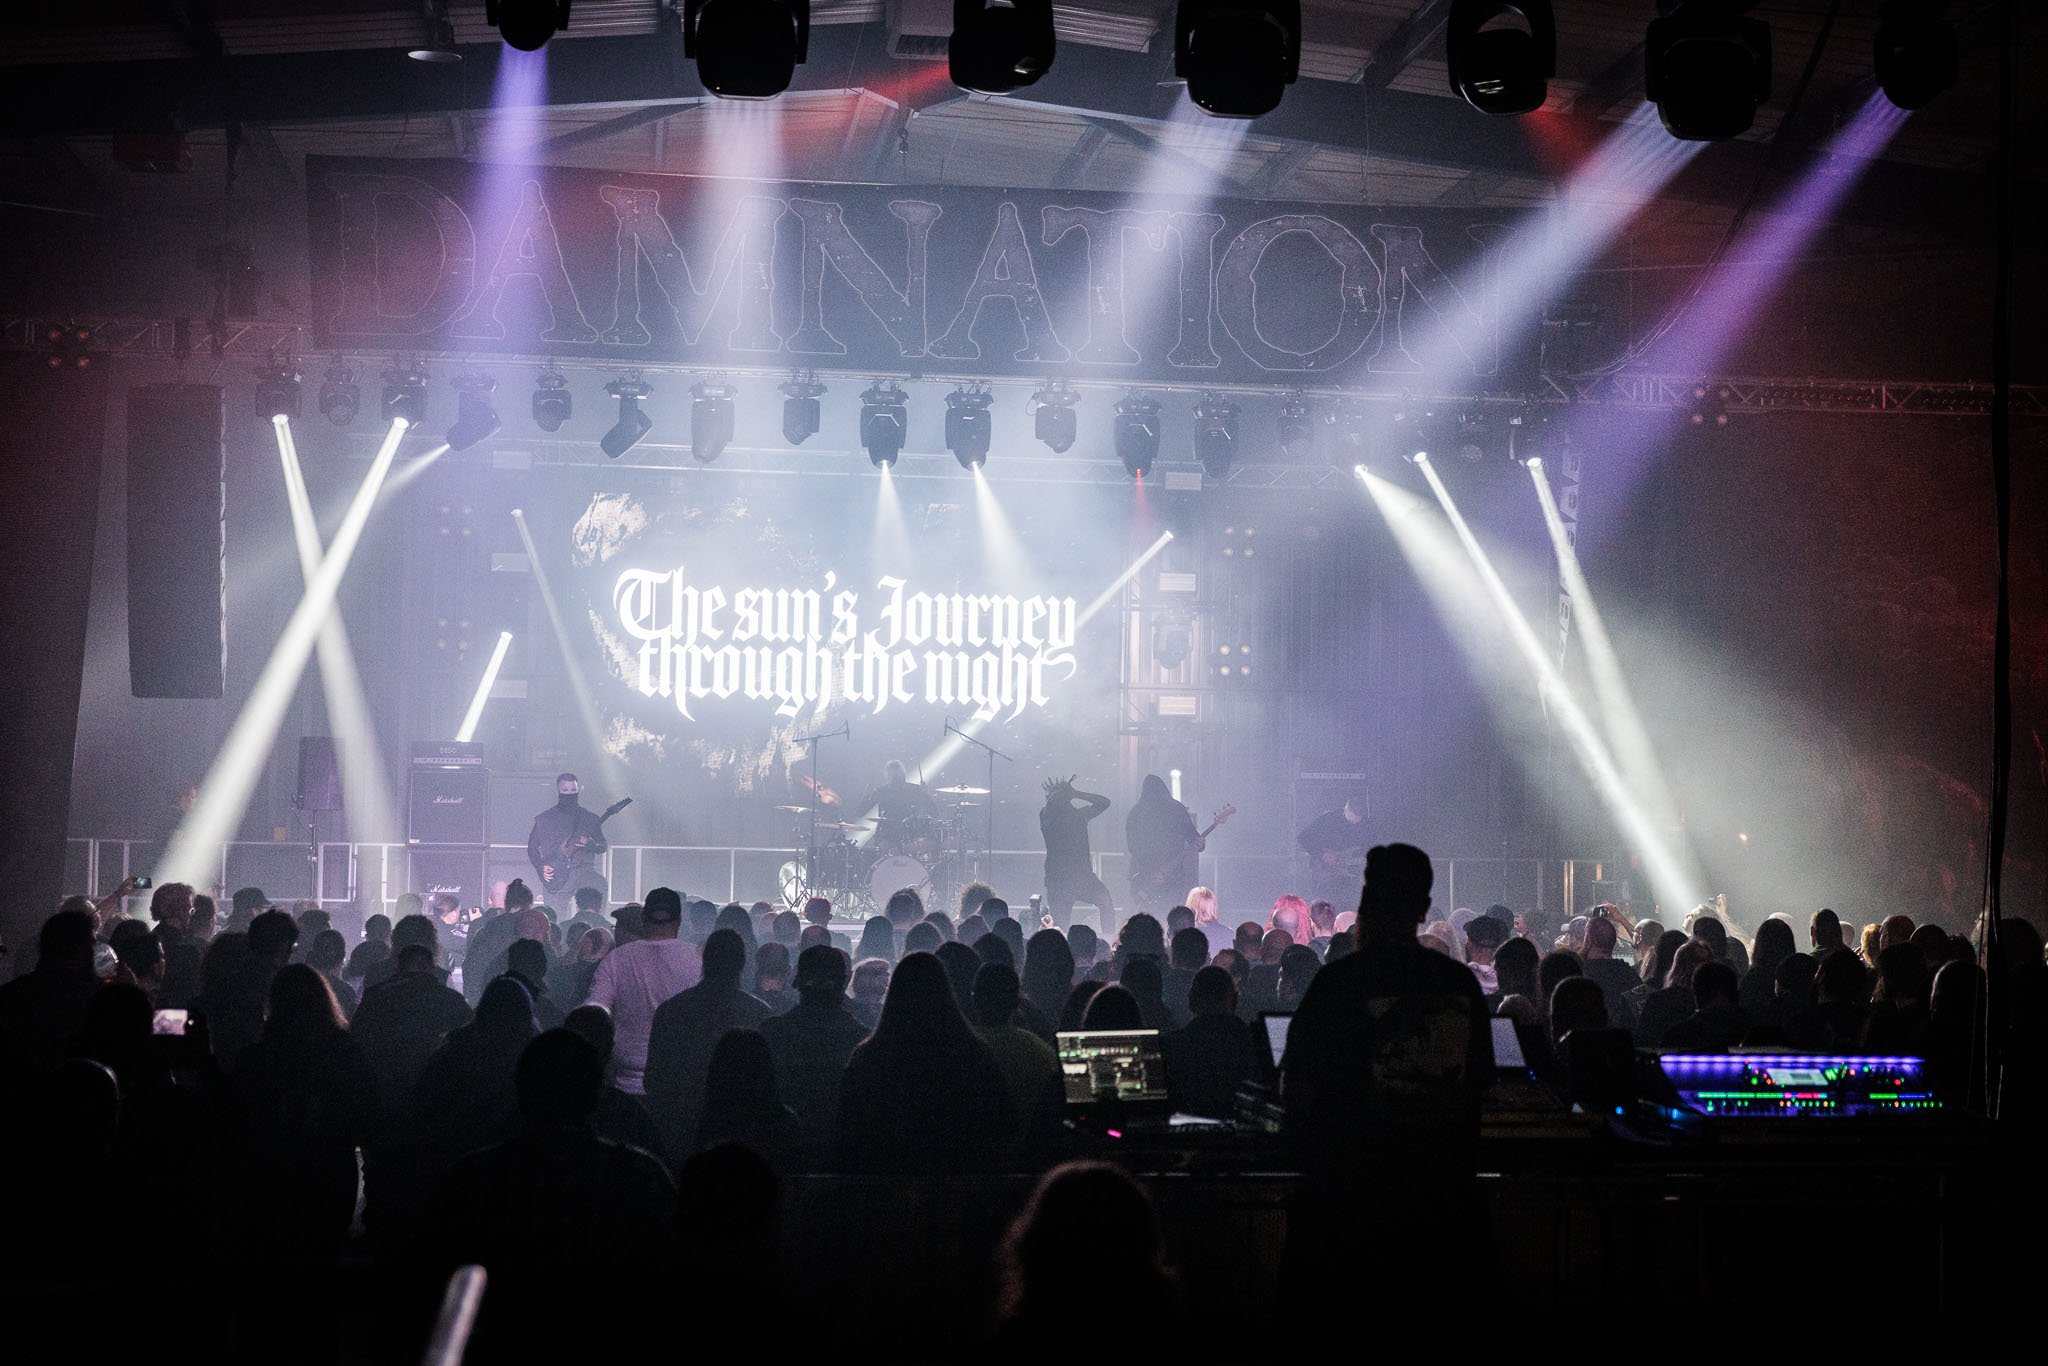 The Suns Journey Through The NIght at Damnation Festival in Manchester on November 3rd 2023-16.jpg